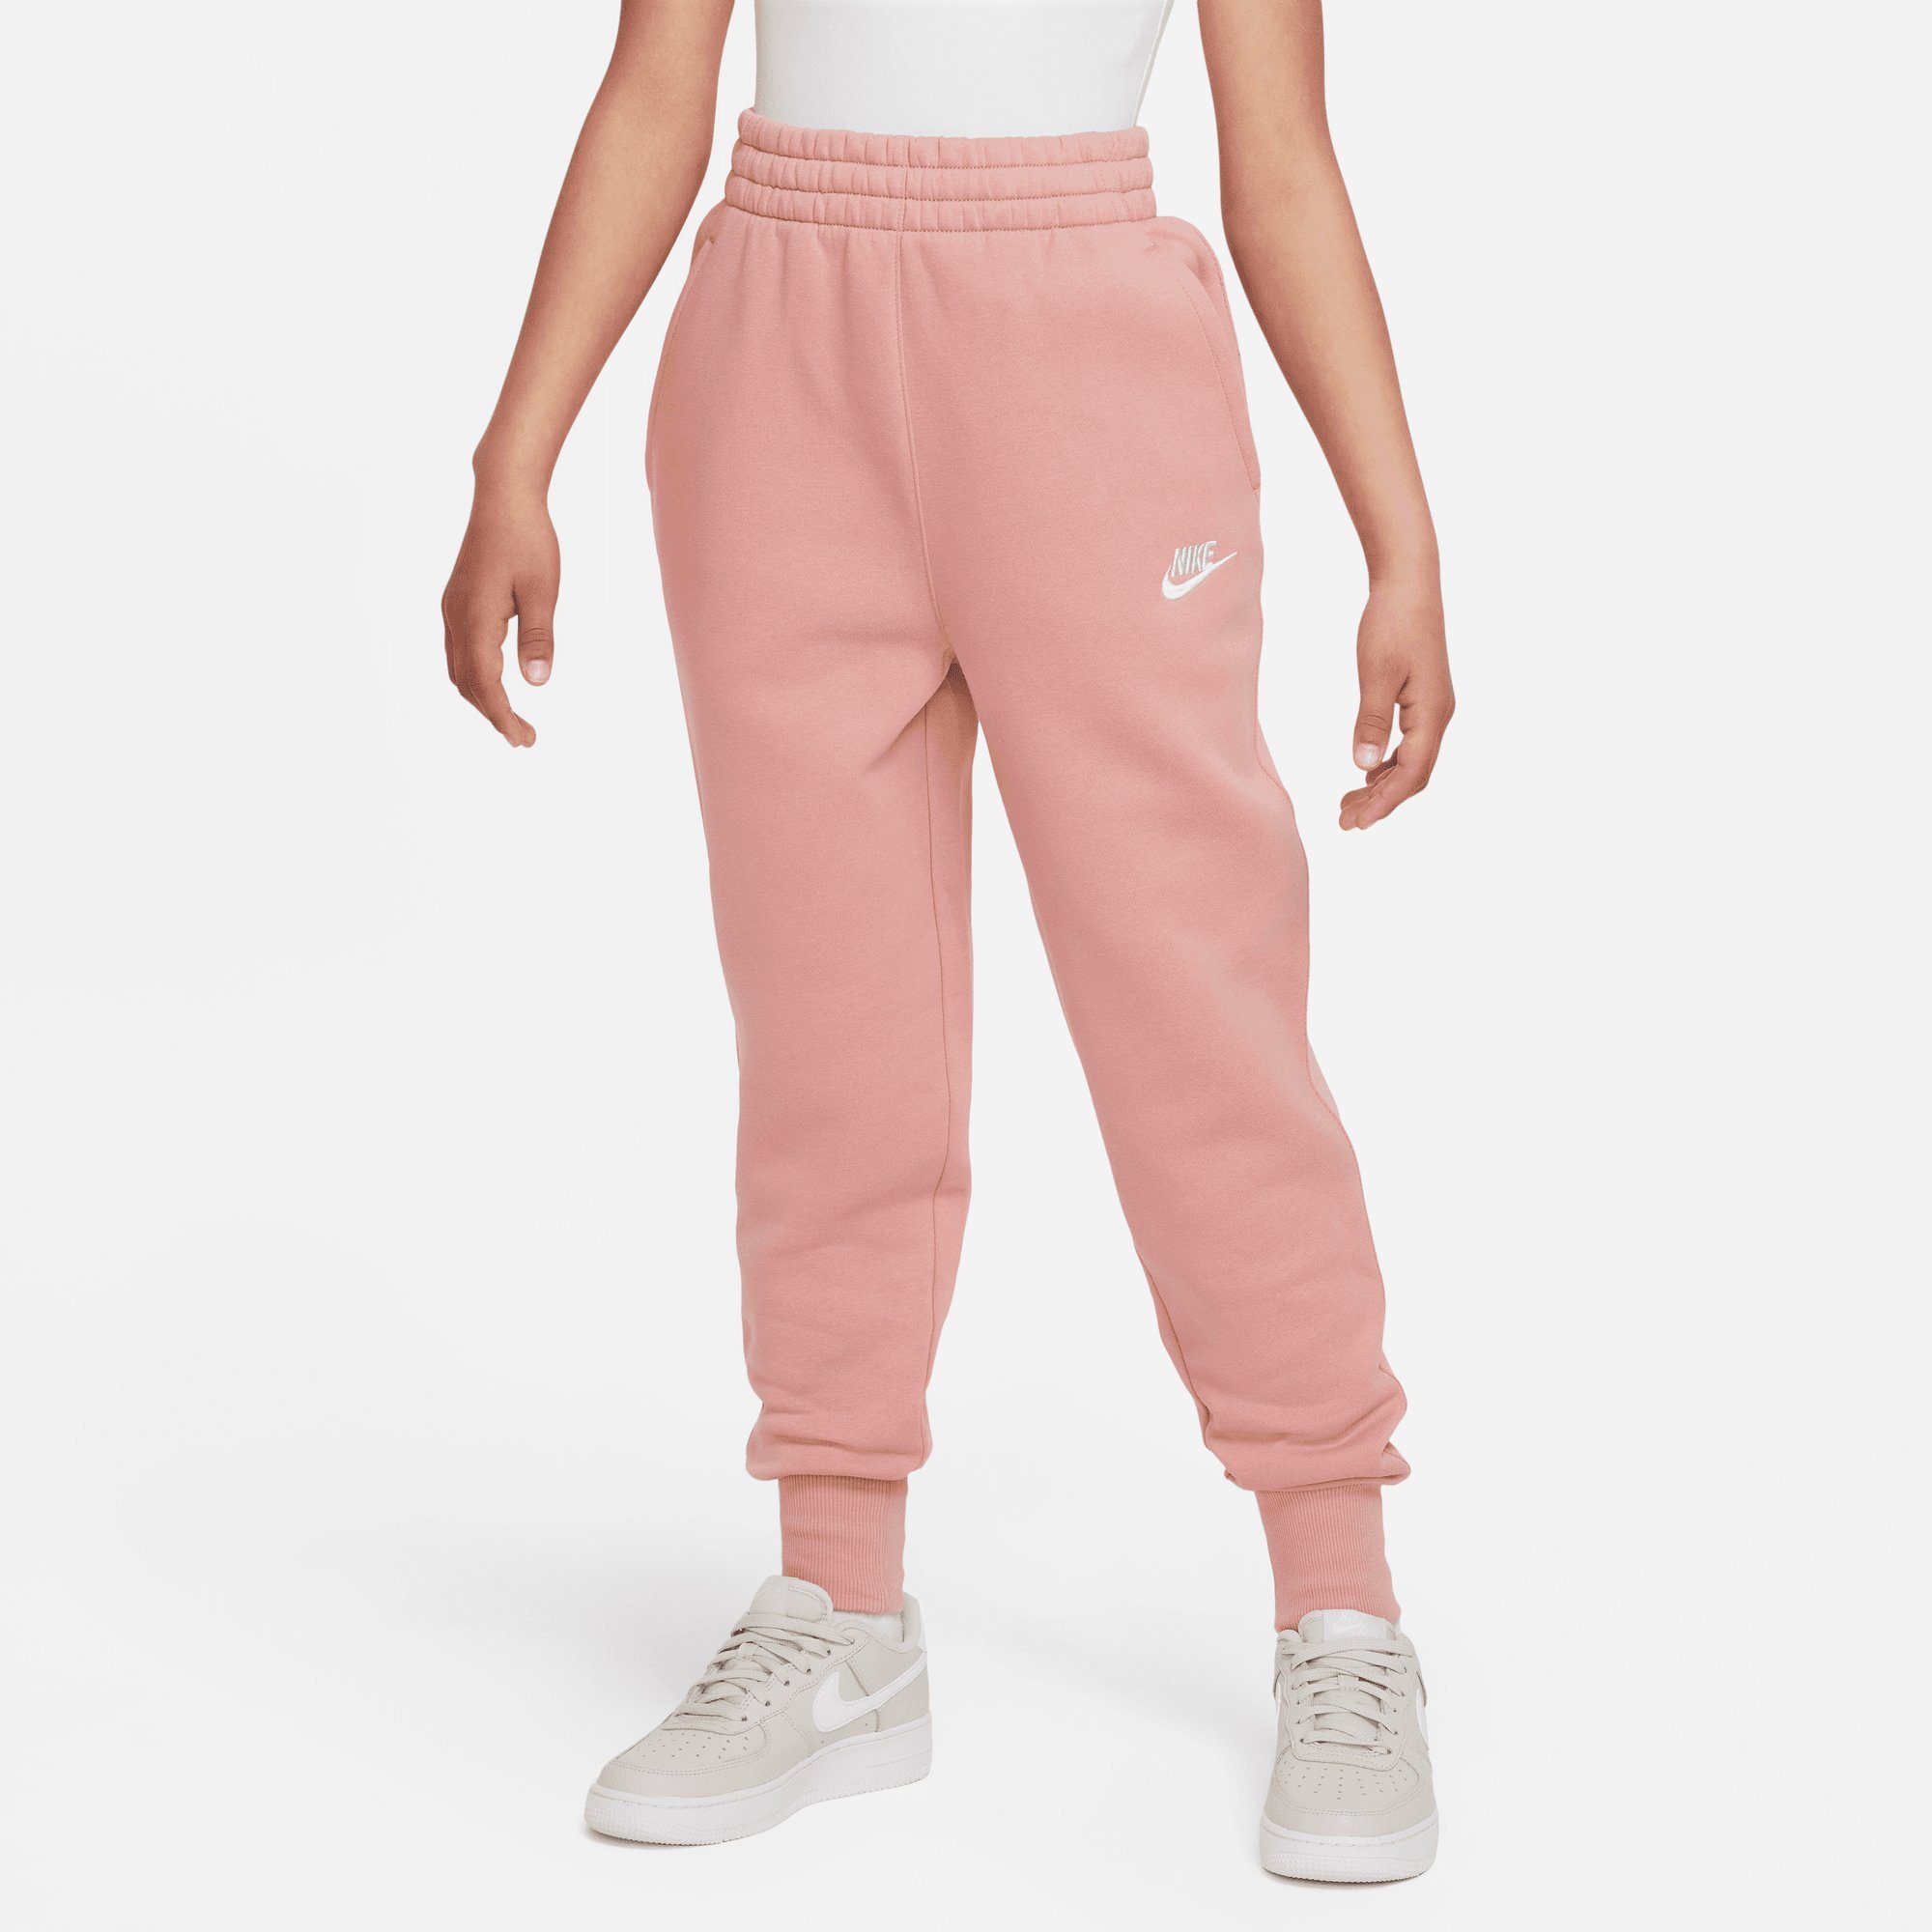 RED KIDS' STARDUST/WHITE FITTED PANTS FLEECE Sportswear Jogginghose Nike (GIRLS) STARDUST/RED HIGH-WAISTED CLUB BIG